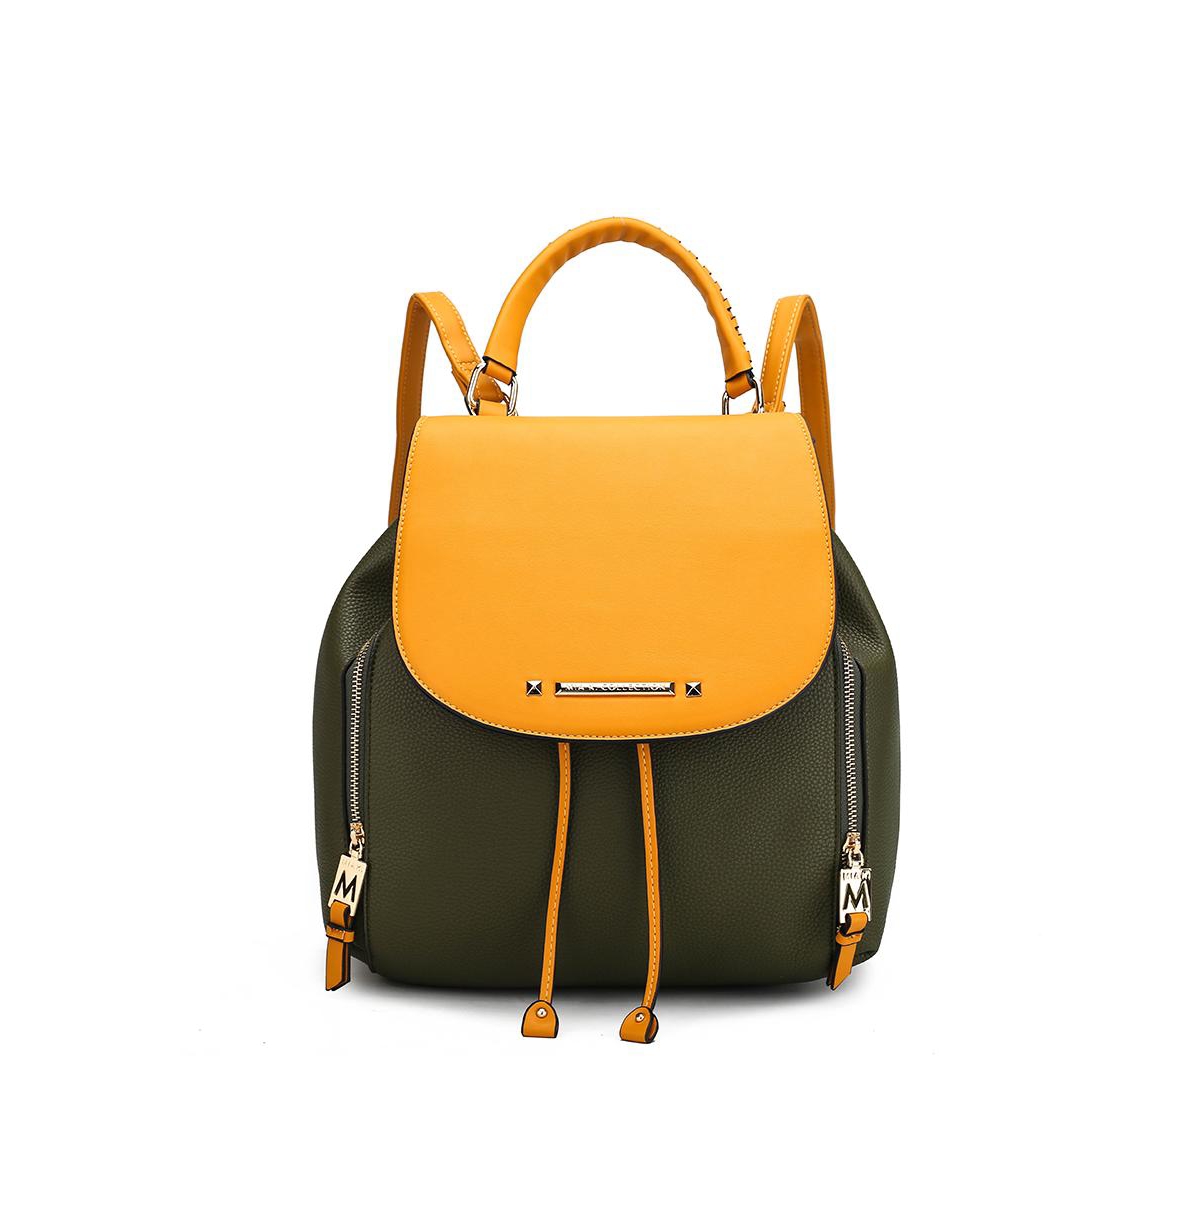 Kimberly Backpack by Mia K - Olive green